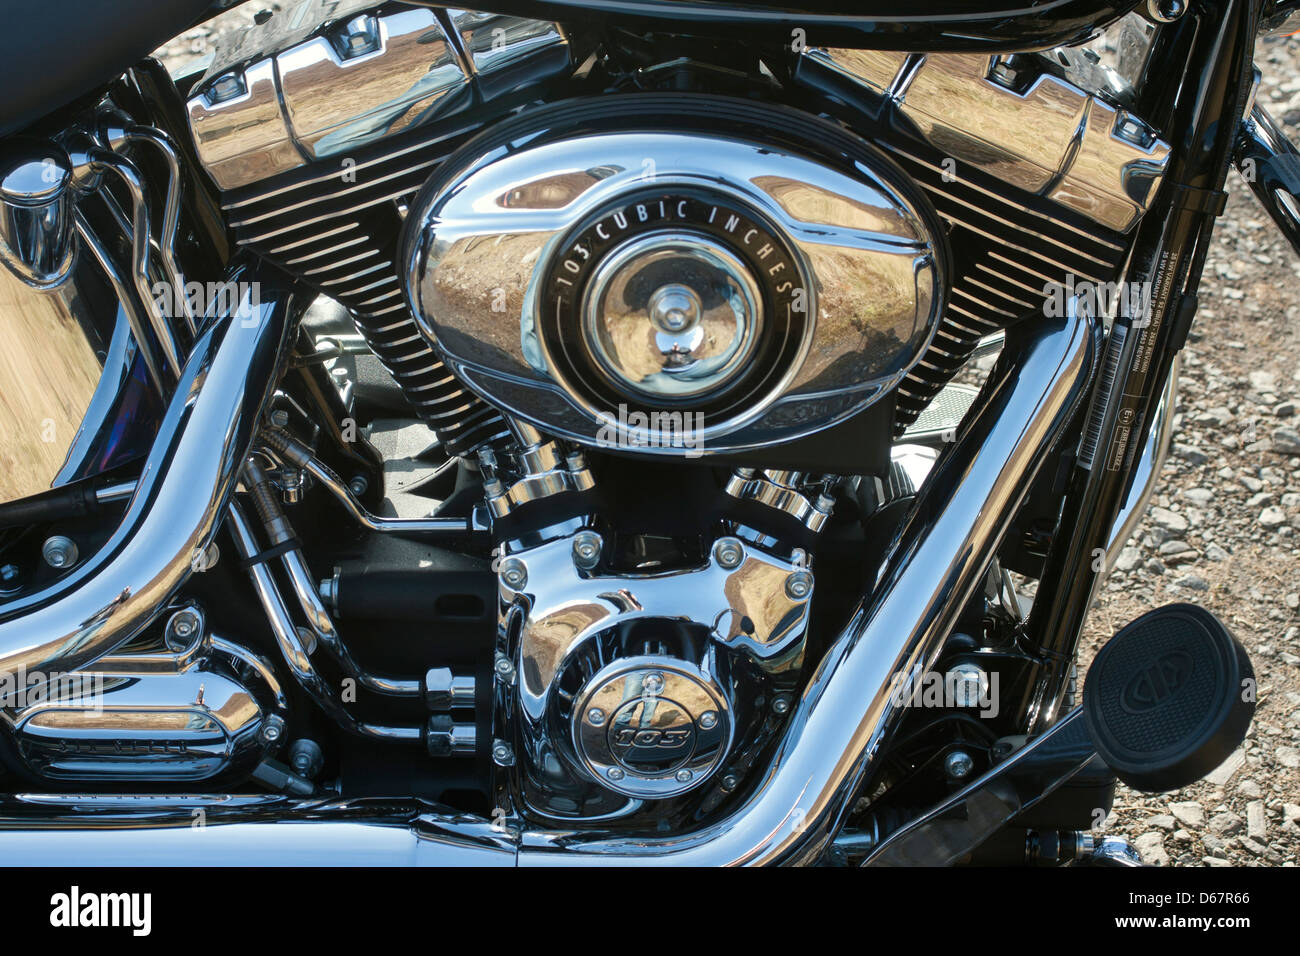 Harley Davidson FLSTC Softail Heritage Classic 2013 close up of the new 103 cubic inch engine Stock Photo